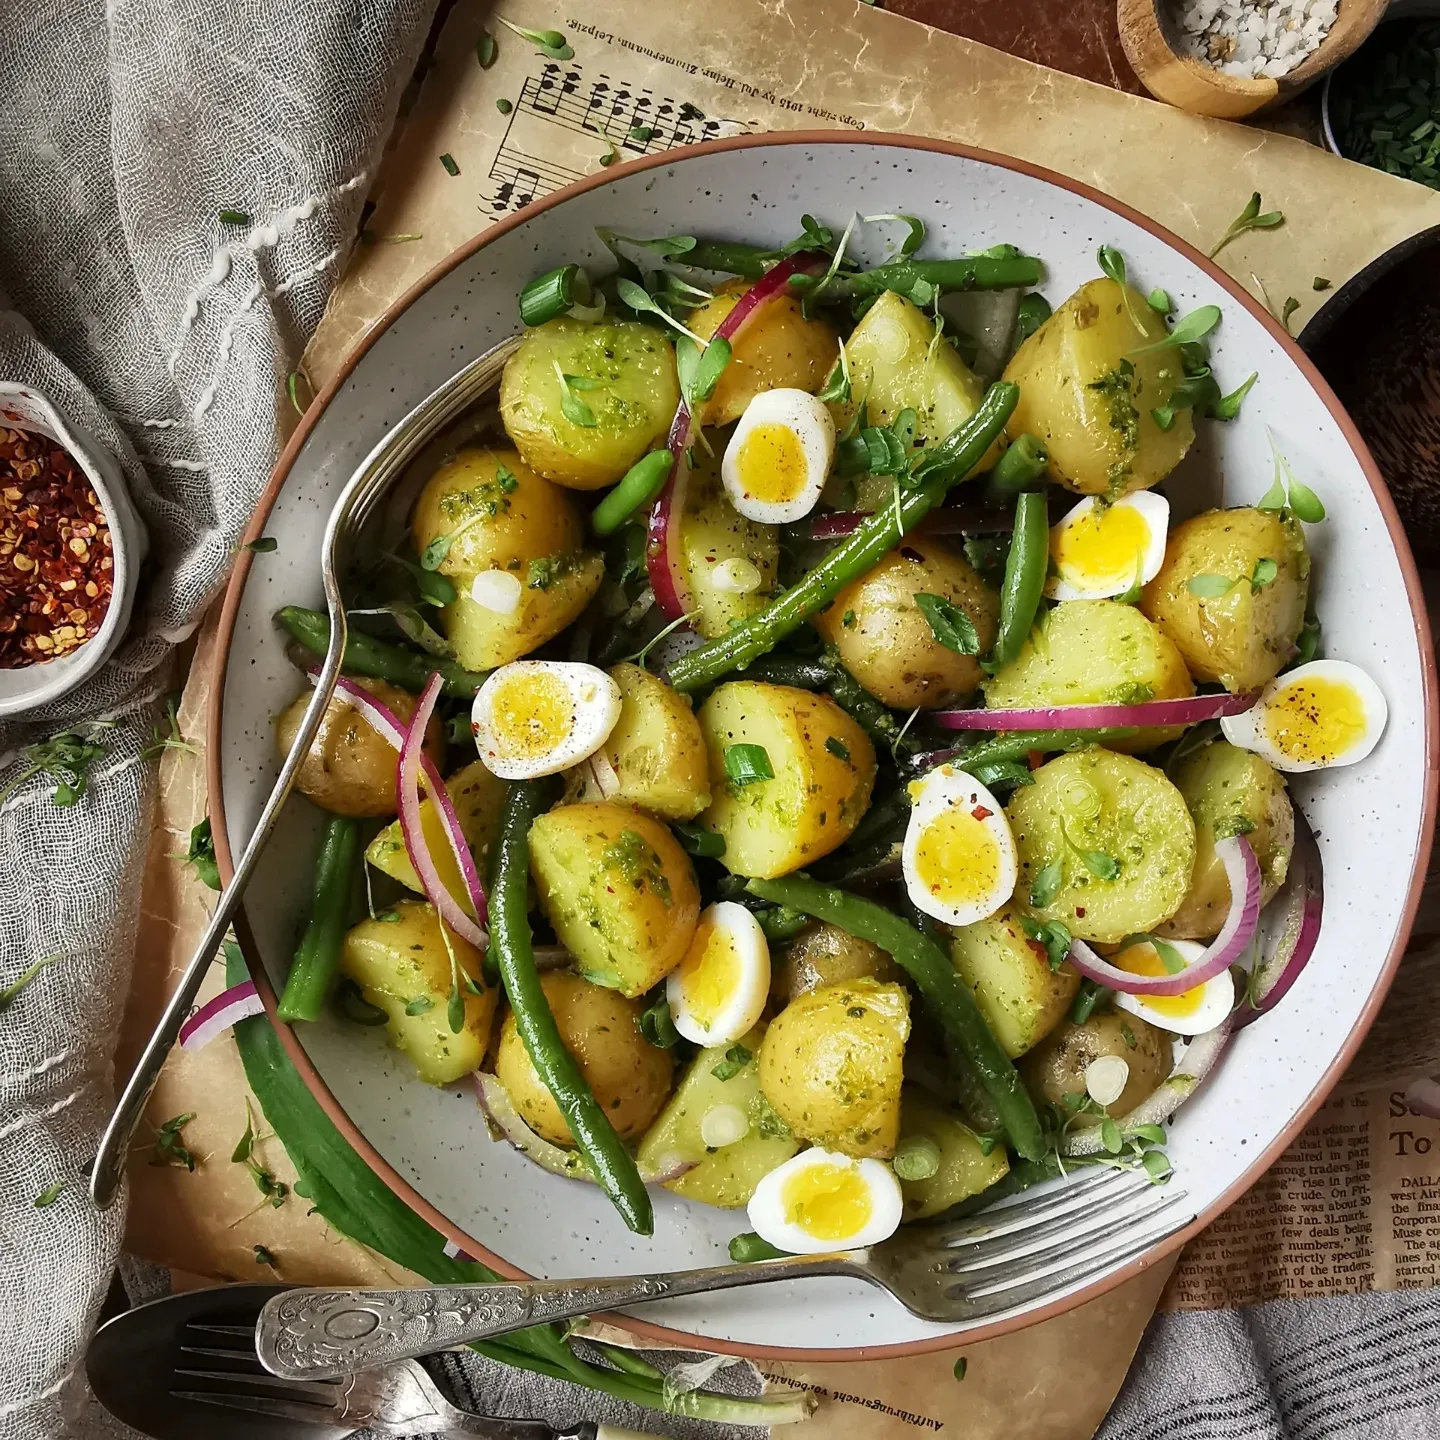 Warm potato salad with green beans, quail eggs and red onion